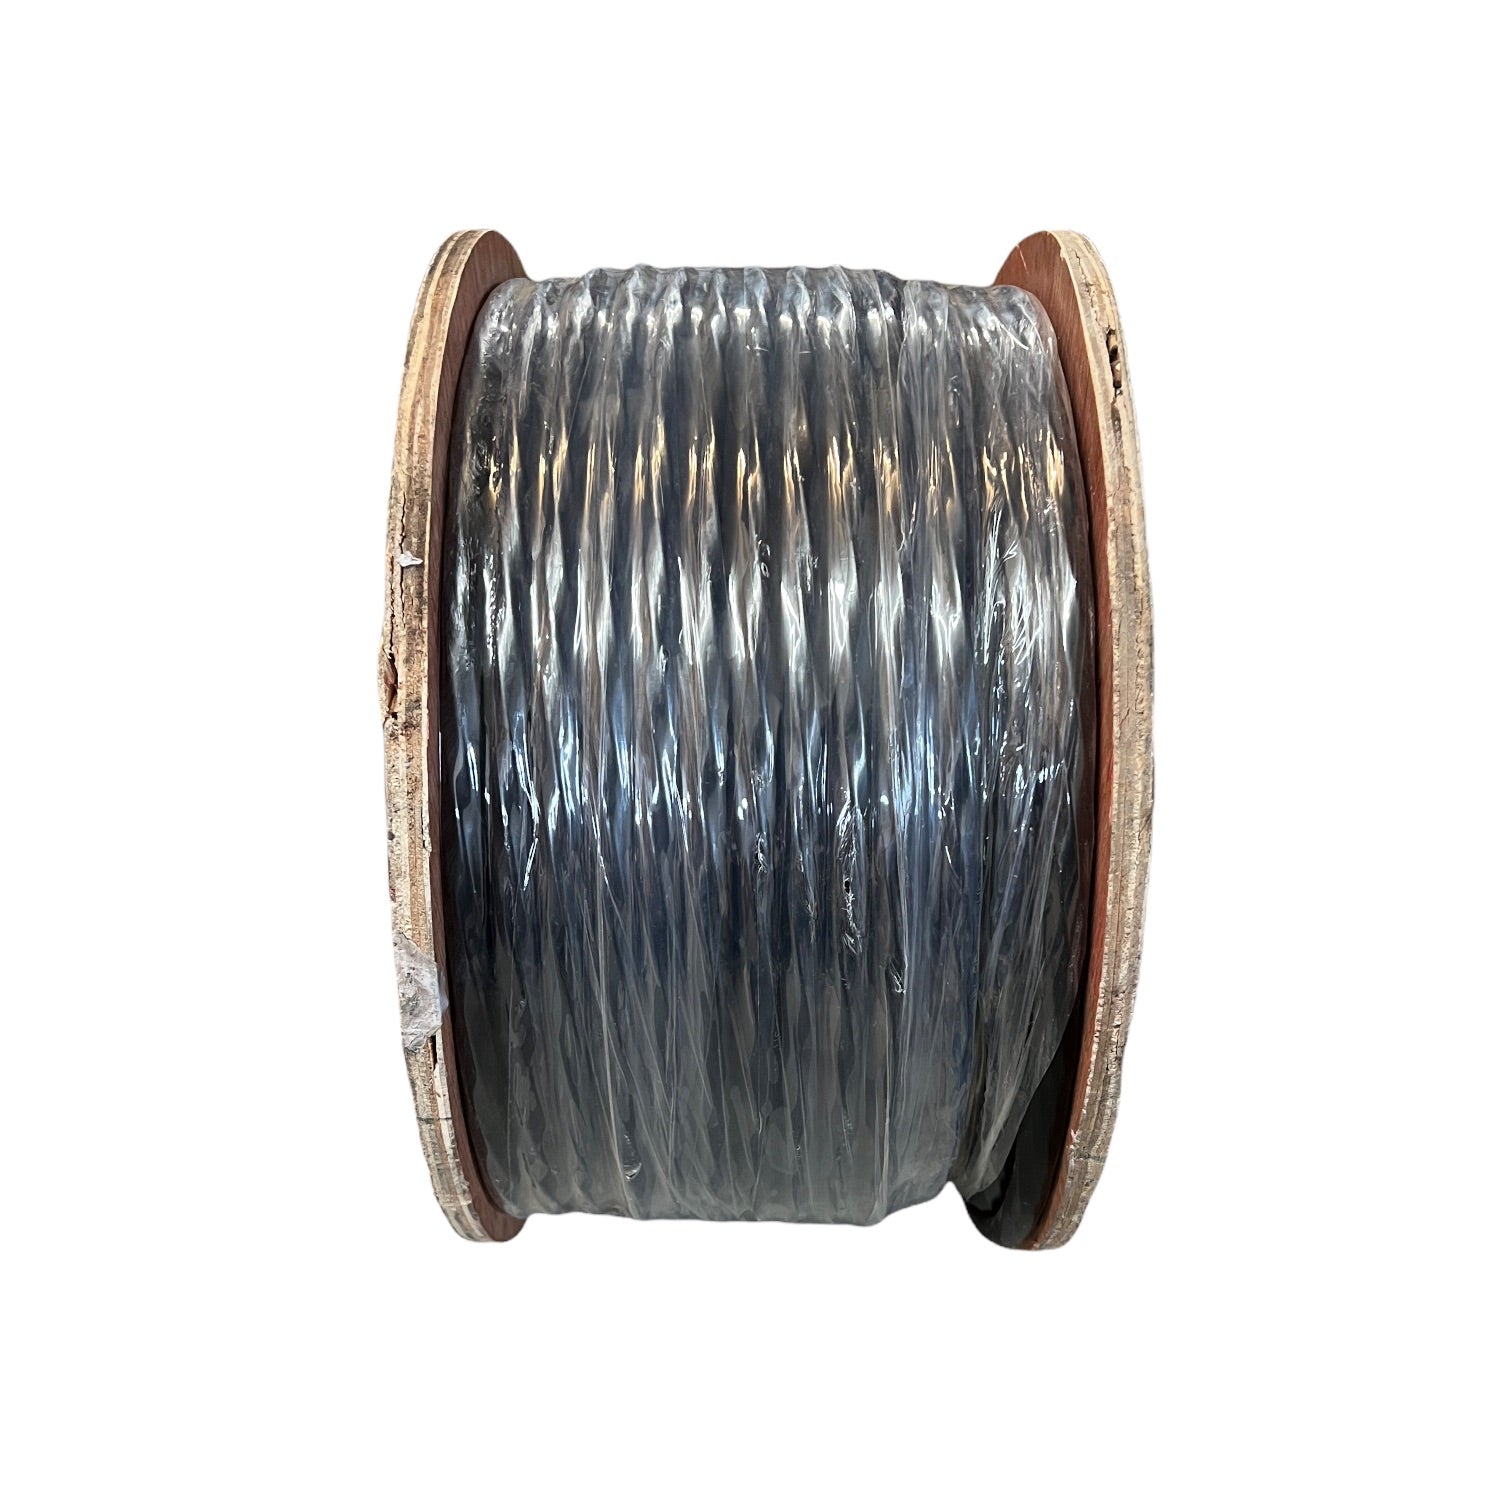 18/7X250 - Multi-Conductor Irrigation Control Wire, 18 awg, 18/7 X 250 ft